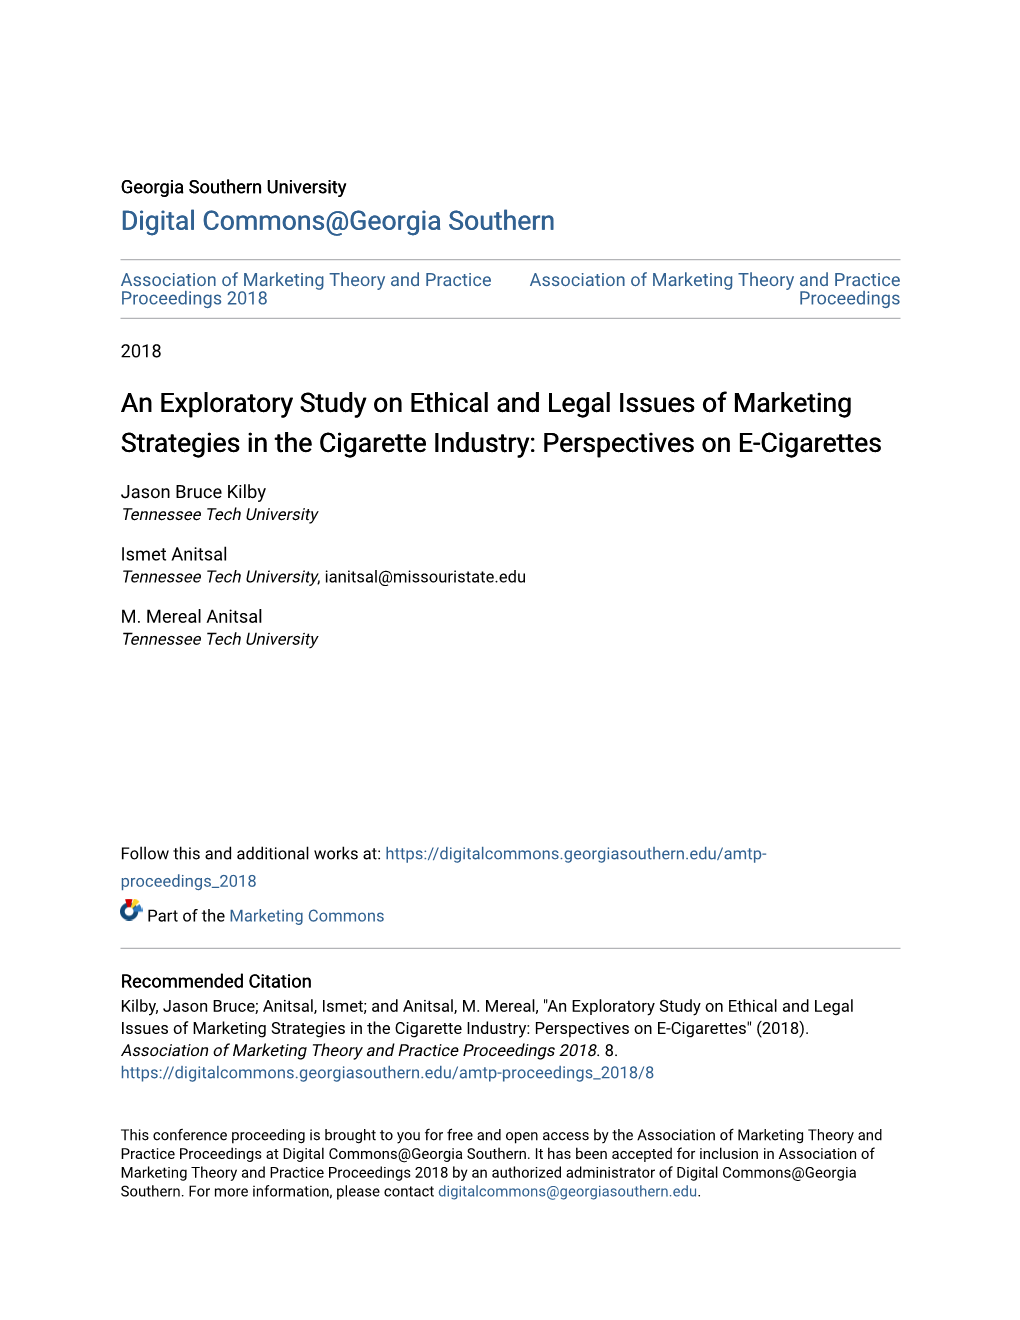 An Exploratory Study on Ethical and Legal Issues of Marketing Strategies in the Cigarette Industry: Perspectives on E-Cigarettes